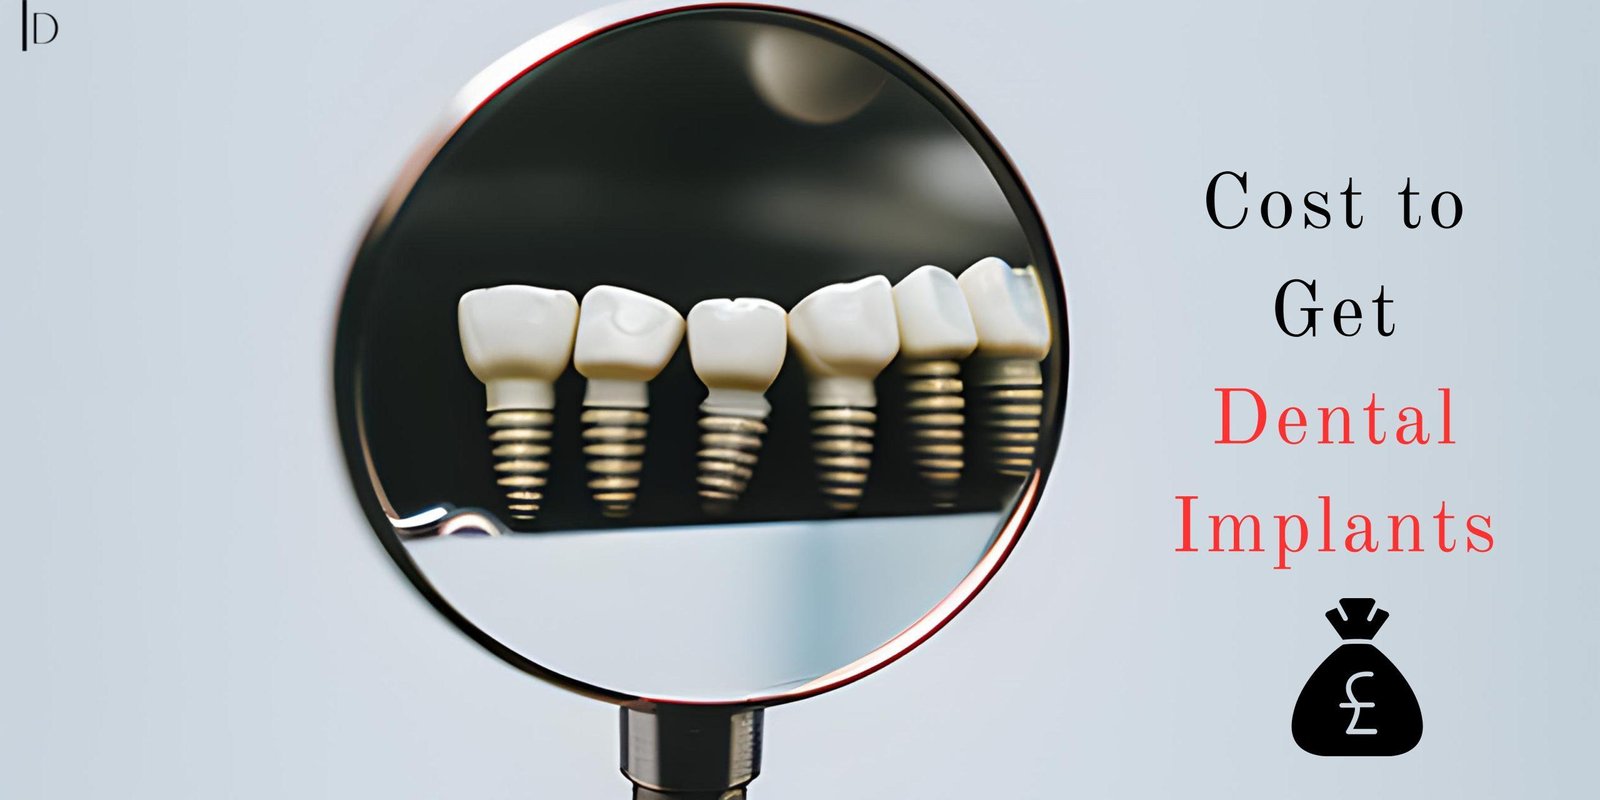 How Much Does It Cost to Get Dental Implants?